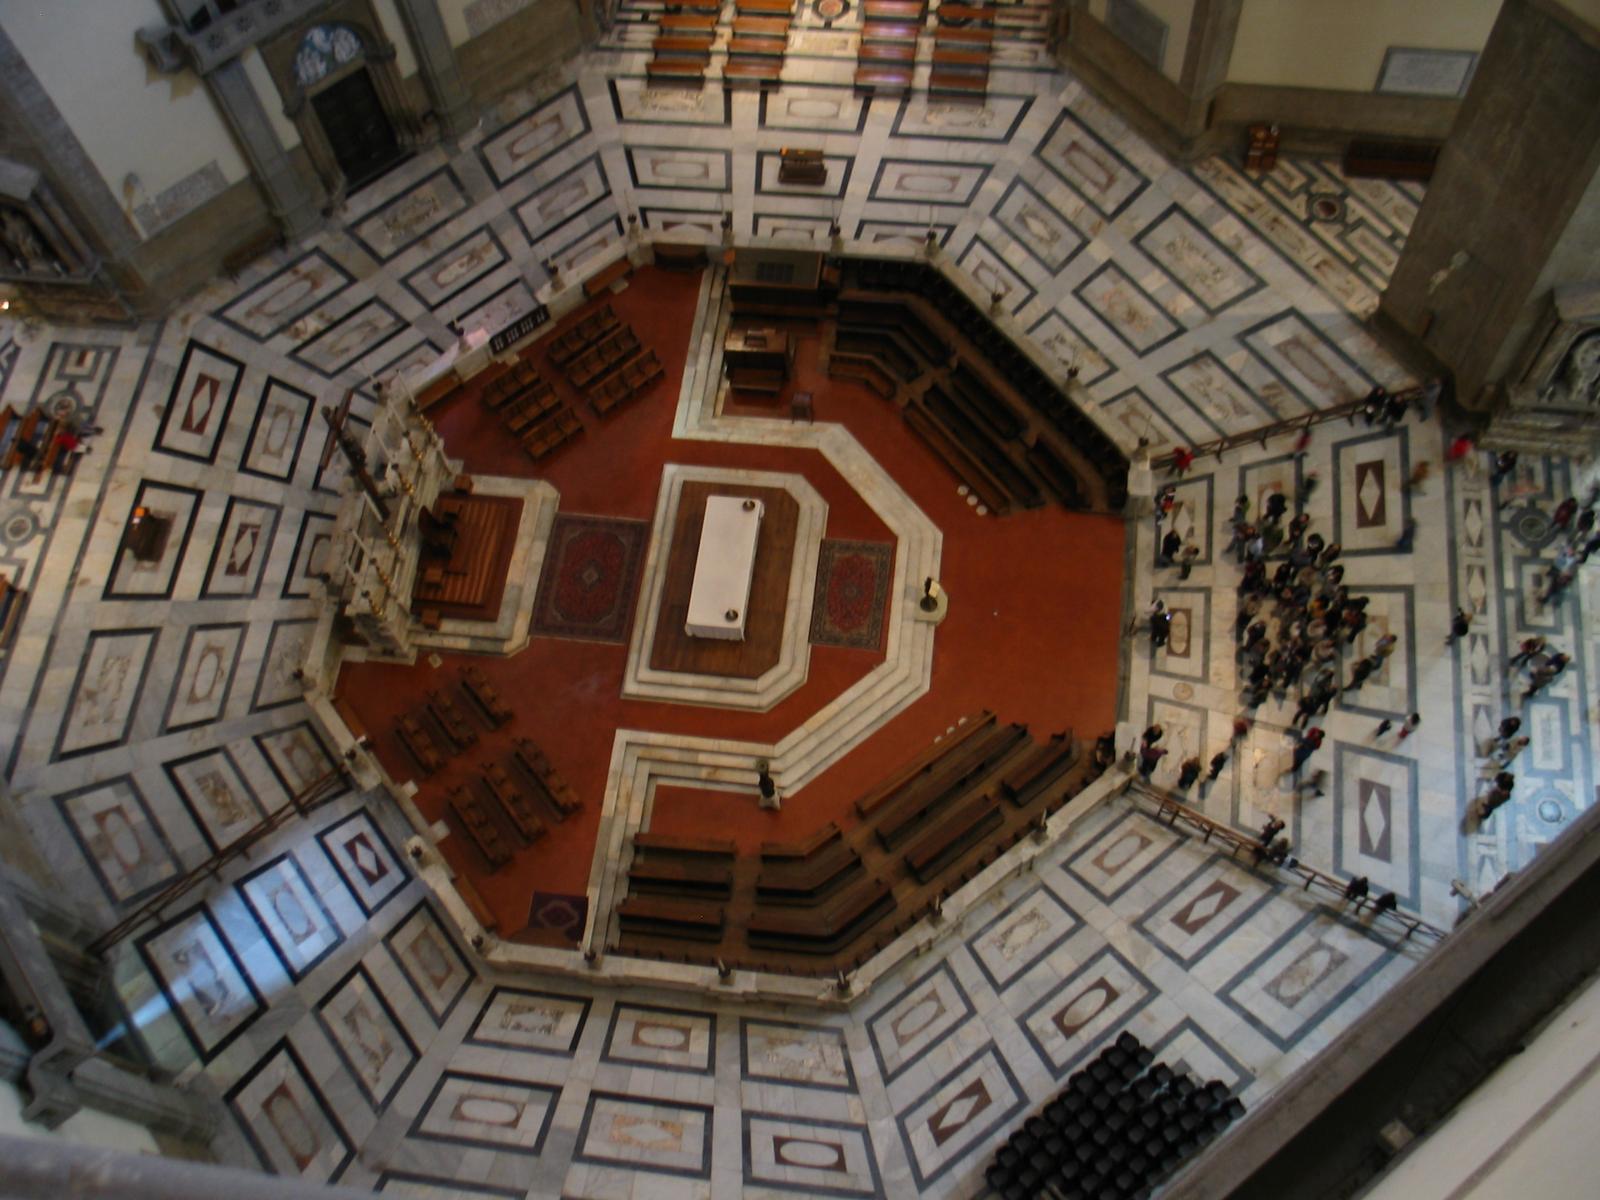 The centre of the Duomo